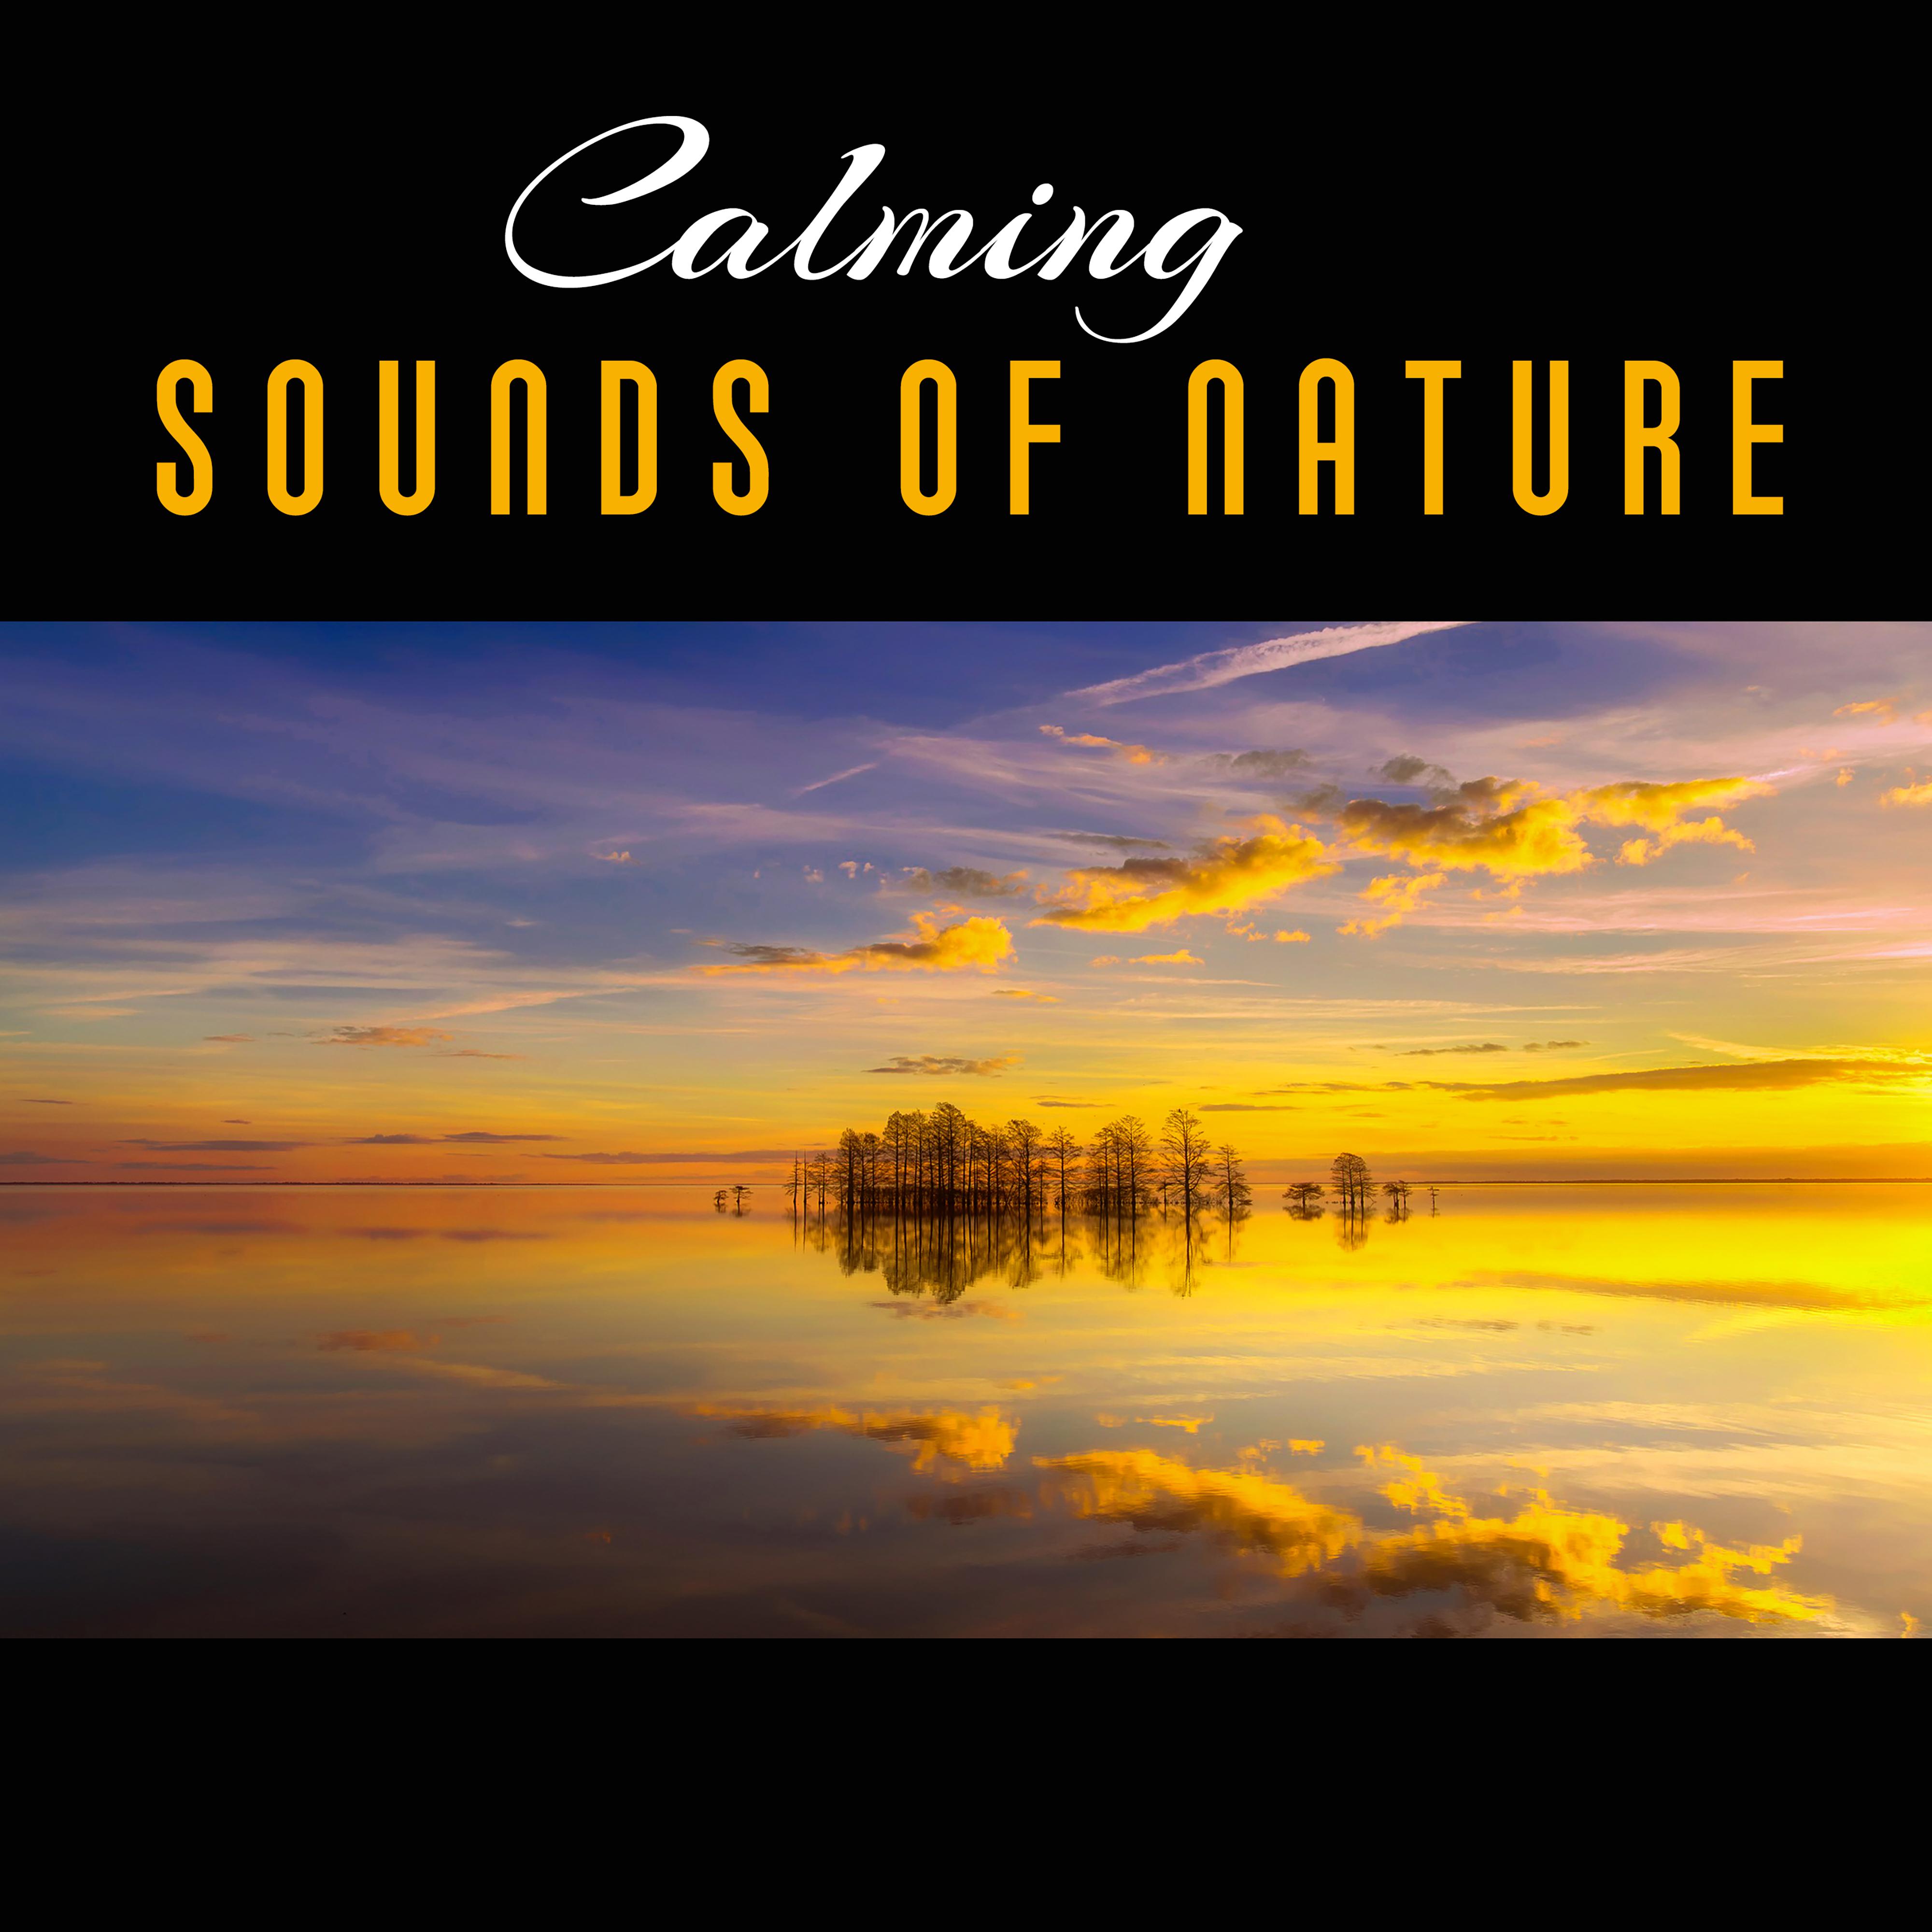 Calming Sounds of Nature  Soft Sounds to Relax, Nature Rest, New Age Music, Spa Massage, Inner Calmness